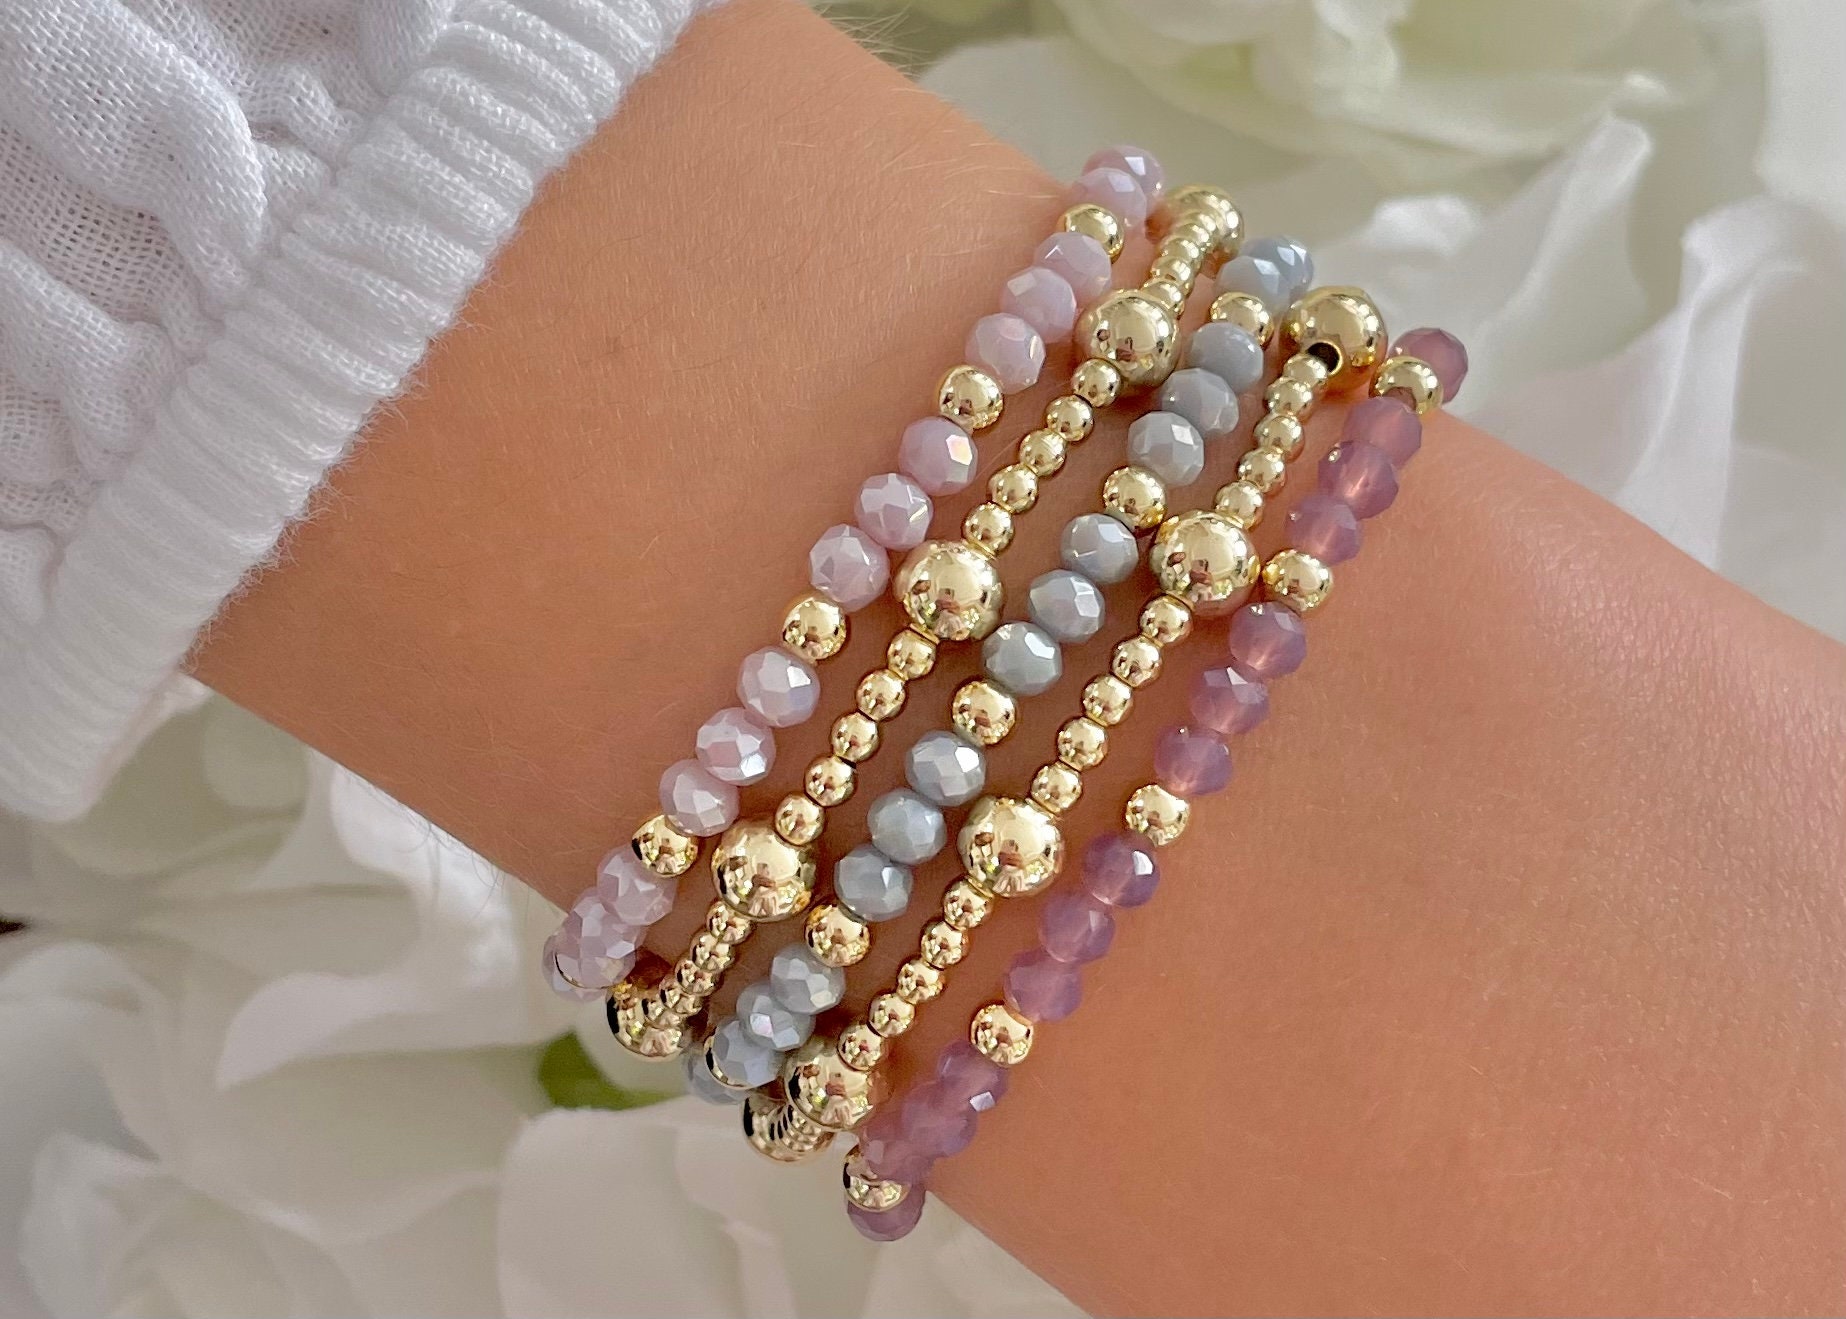 Beaded Bracelet Set / Set of Four / Natural Glass Beads / Iridescent  Stretch / Boho Bohemaian Style / Stackable Arm Candy / Gifts for Her 